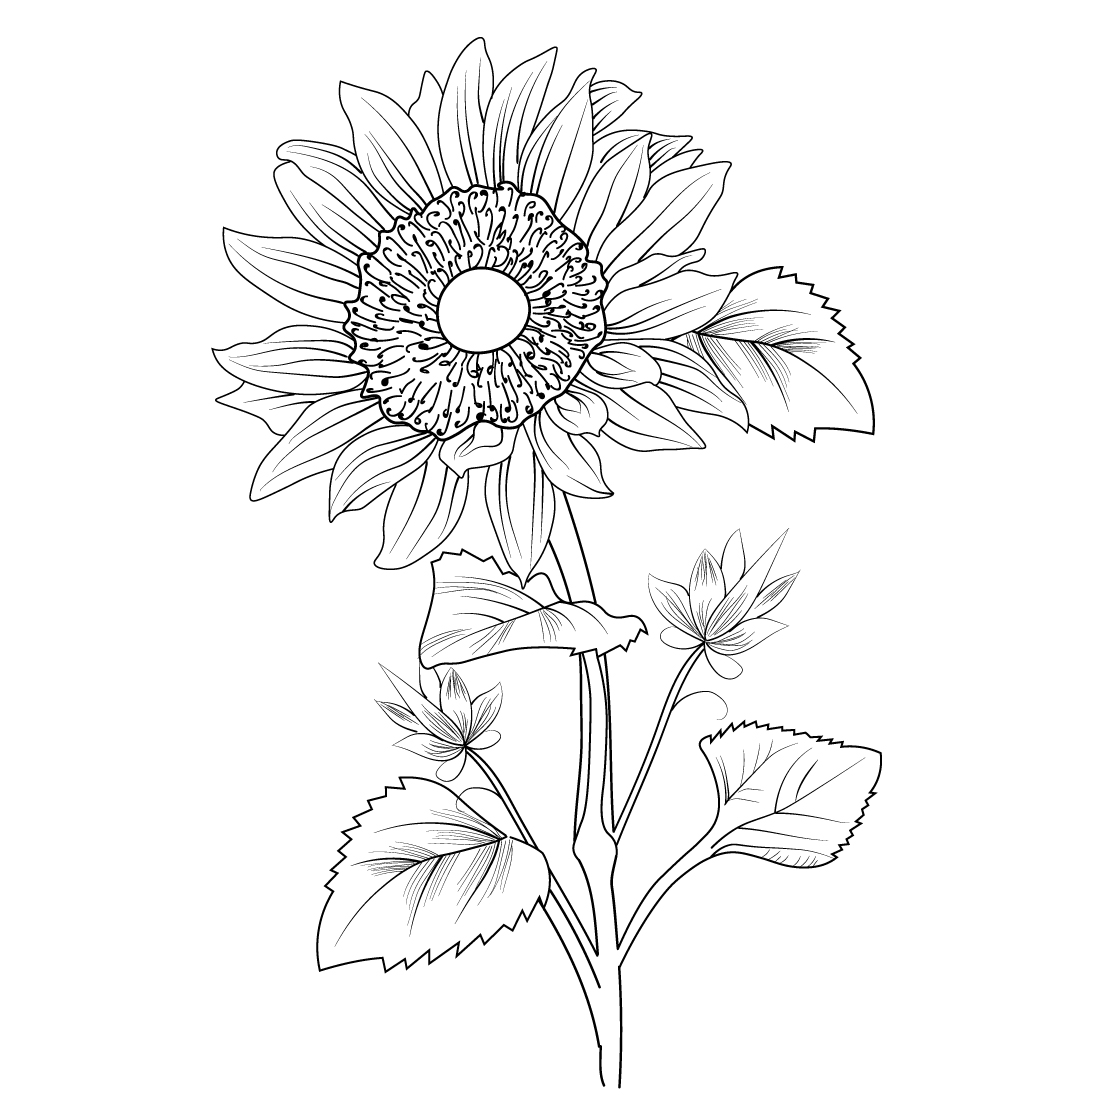 Sunflower Clipart Sunflower Outline Pencil And In Color - Infoupdate.org